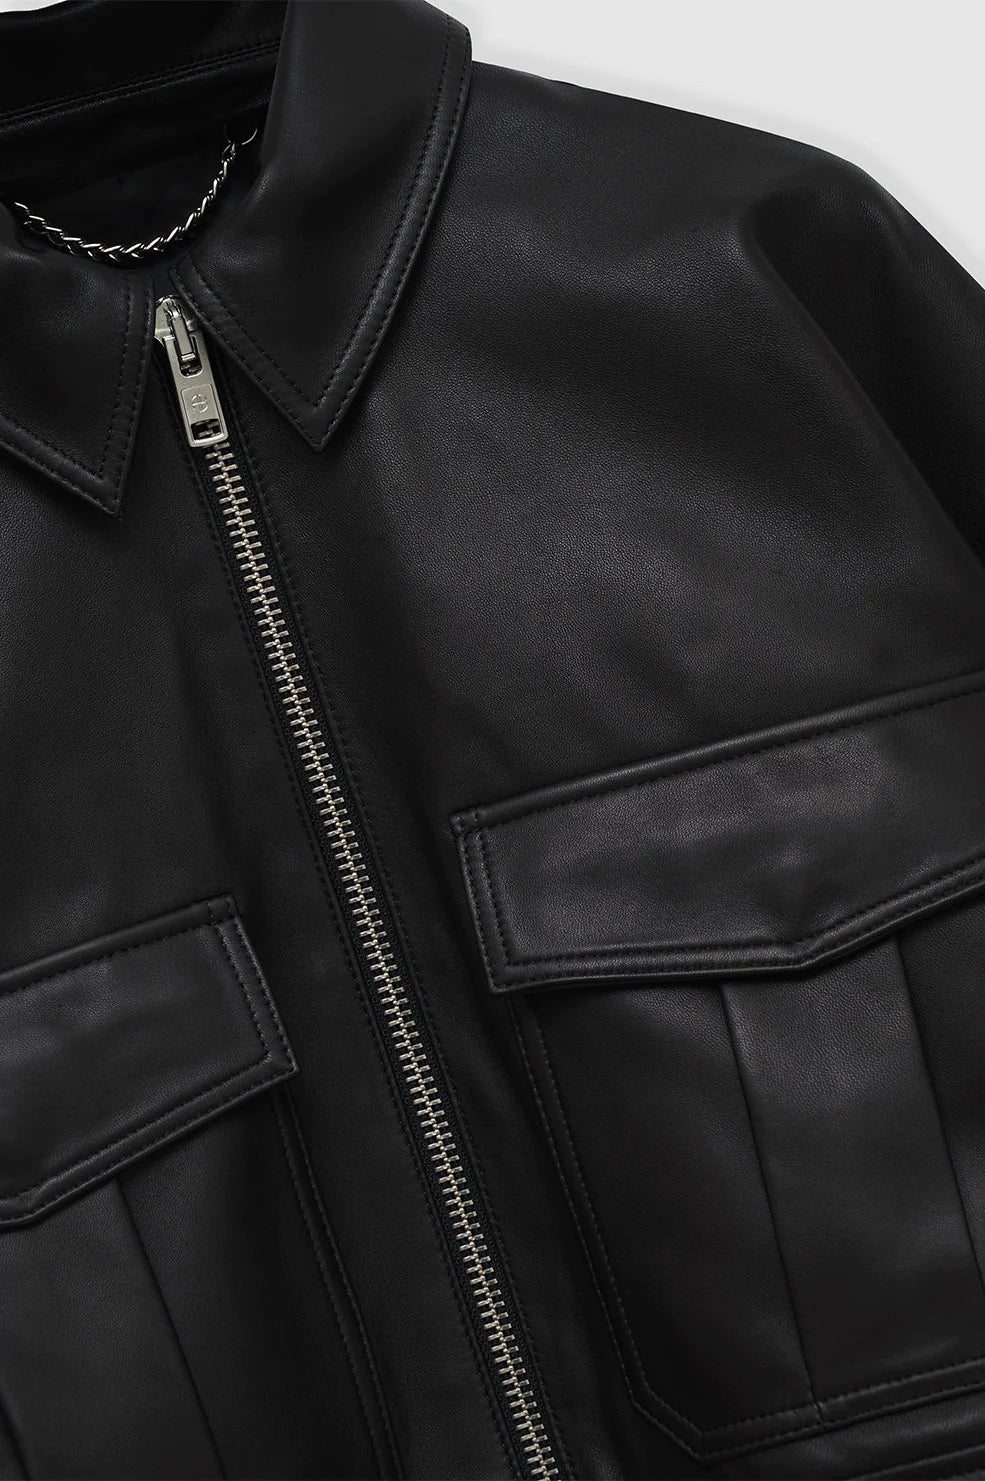 Christian Leather Jacket in Black